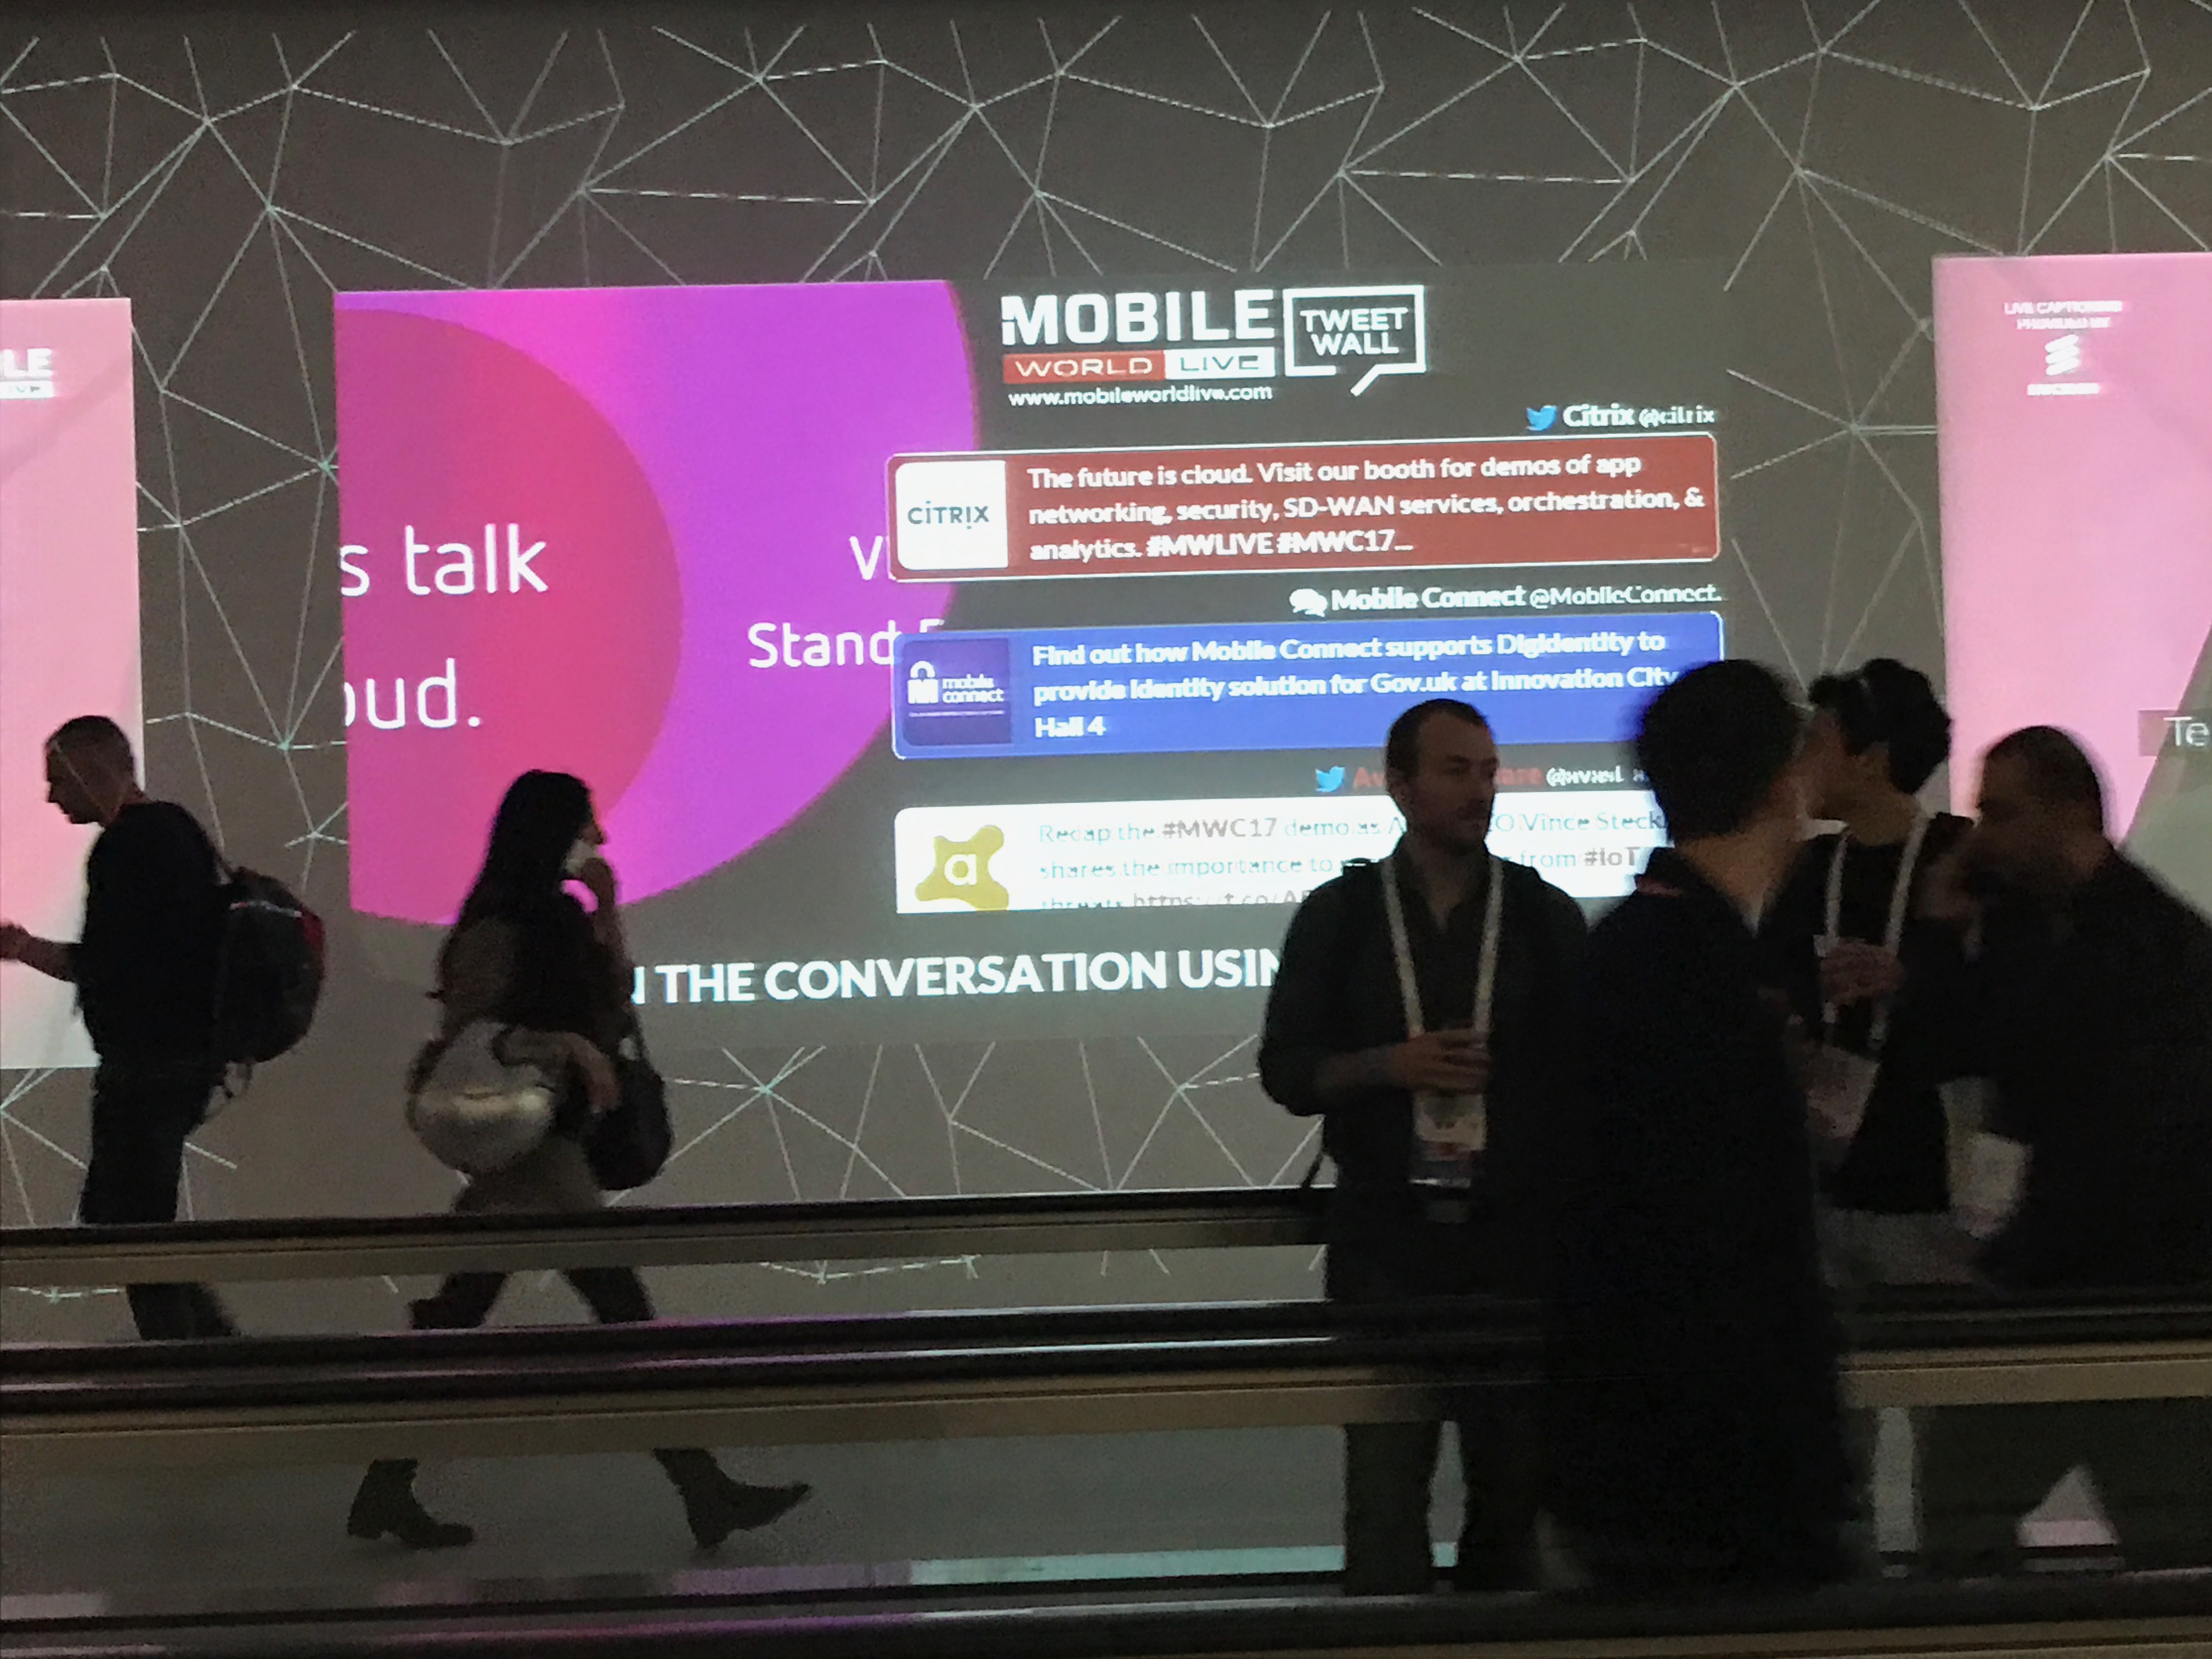 social wall projected on a wall next to moving walkway